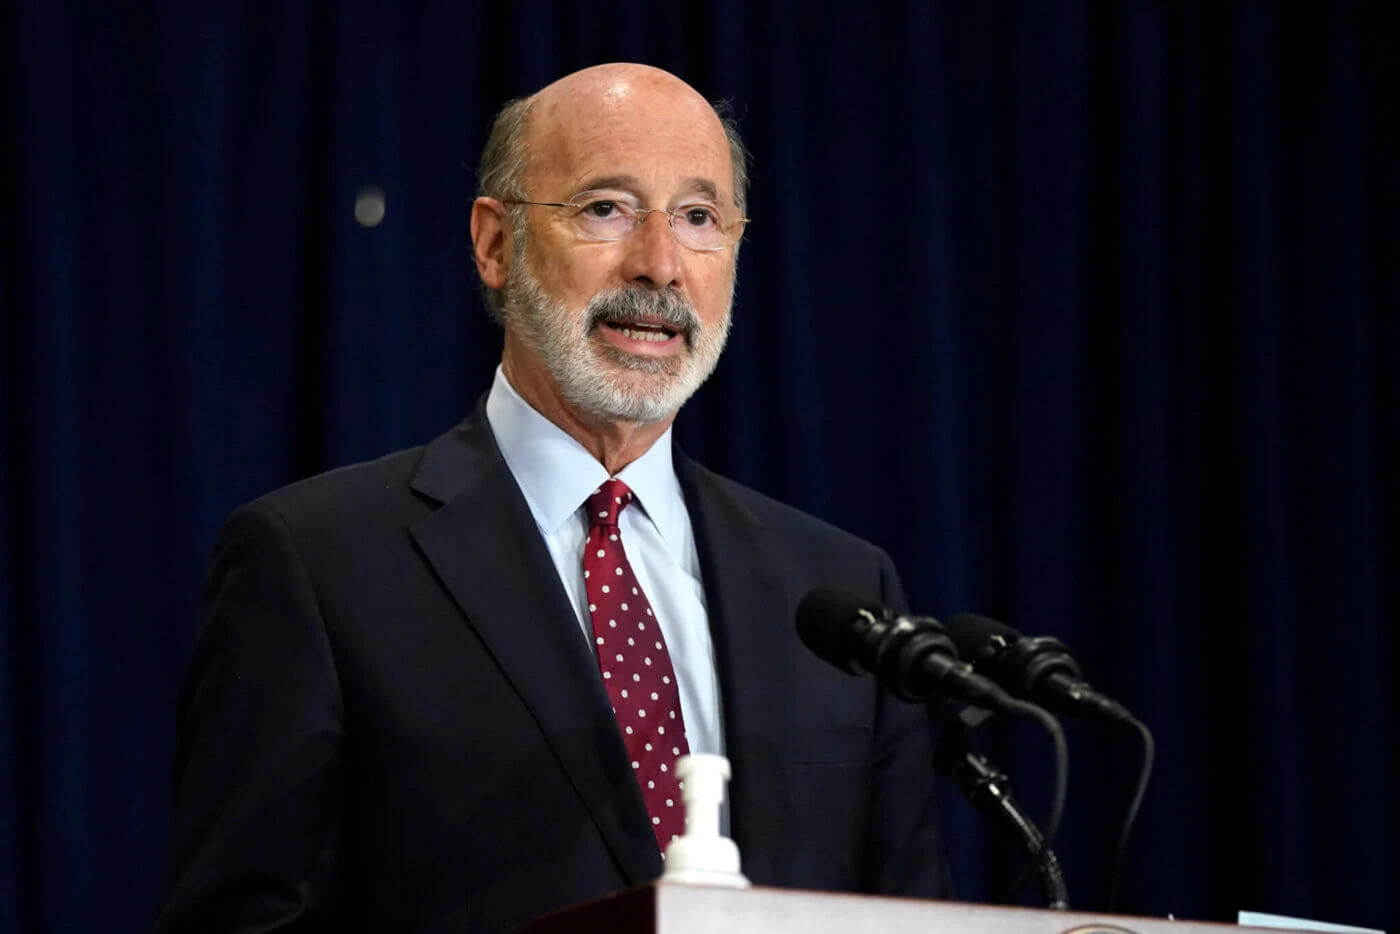 FILE - In this Nov. 4, 2020, file photo, Pennsylvania Gov. Tom Wolf speaks during a news conference in Harrisburg. (AP Photo/Julio Cortez, File)